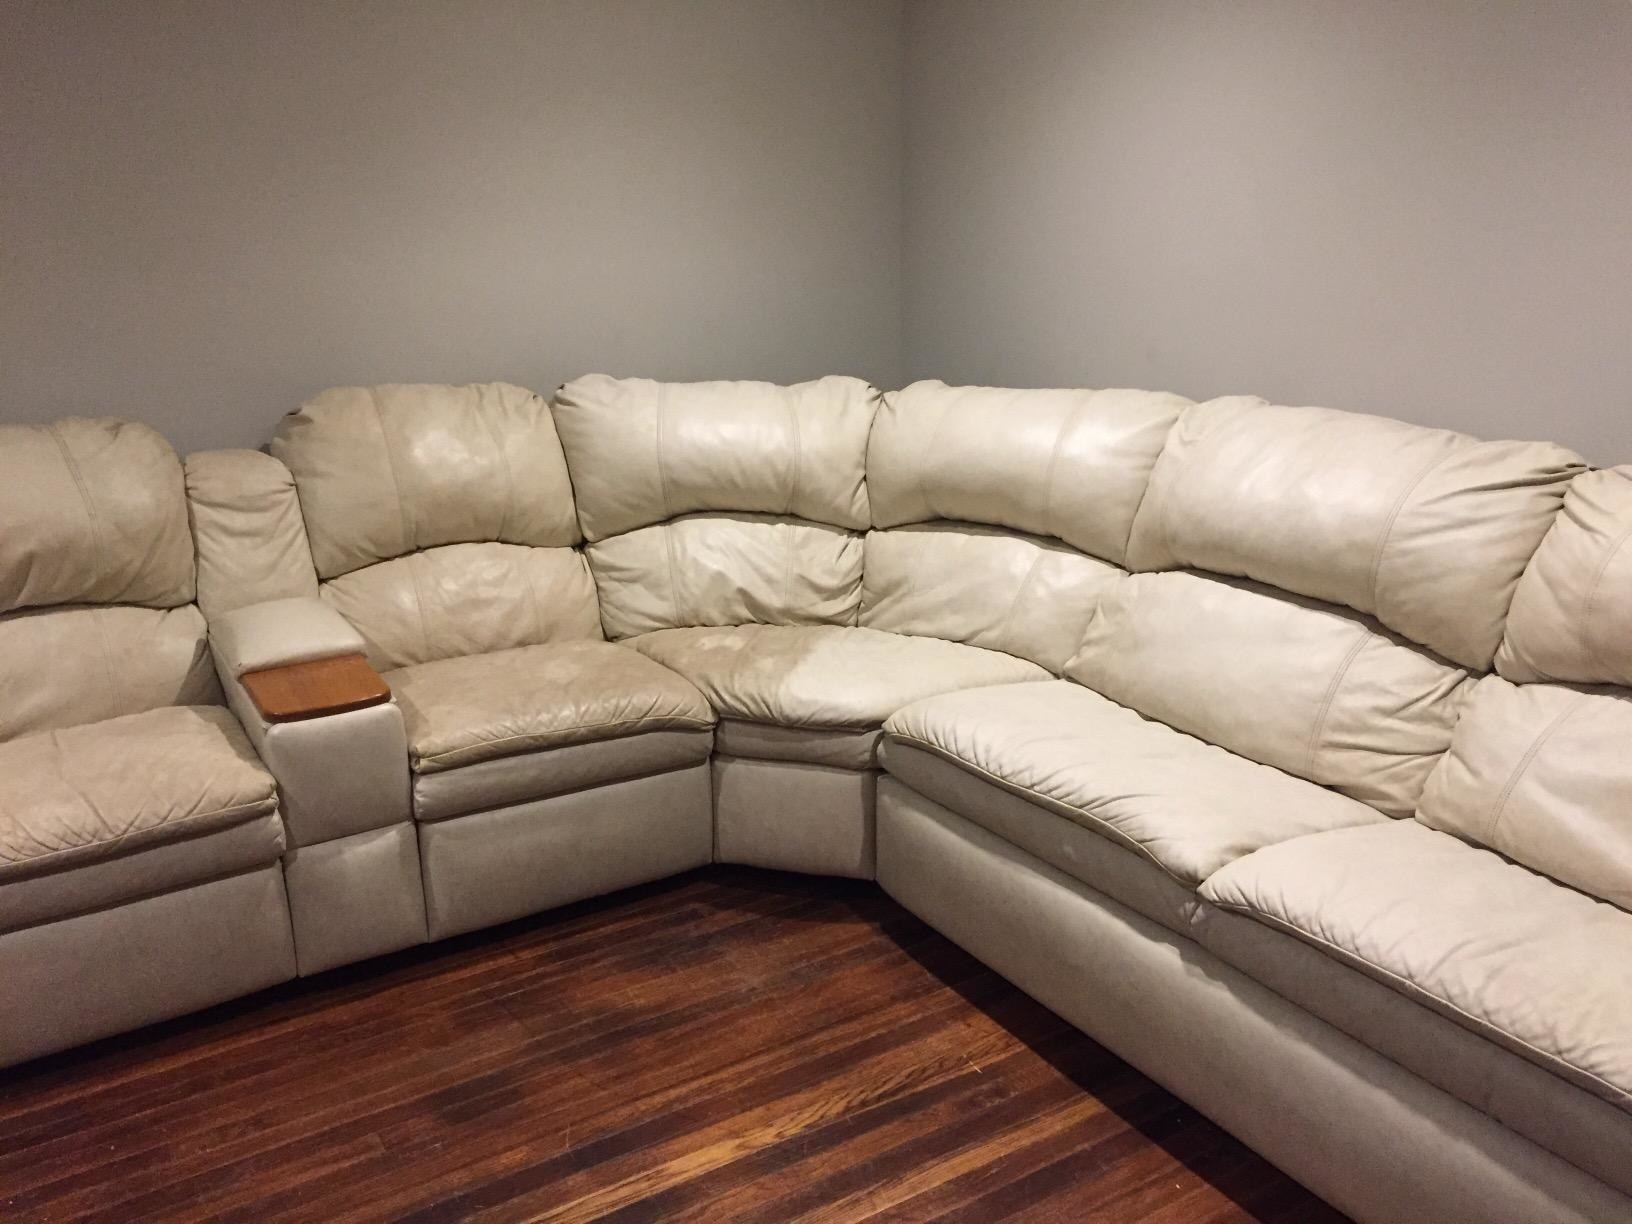 Reviewer's couch with one side cleaned with polishing cleaner